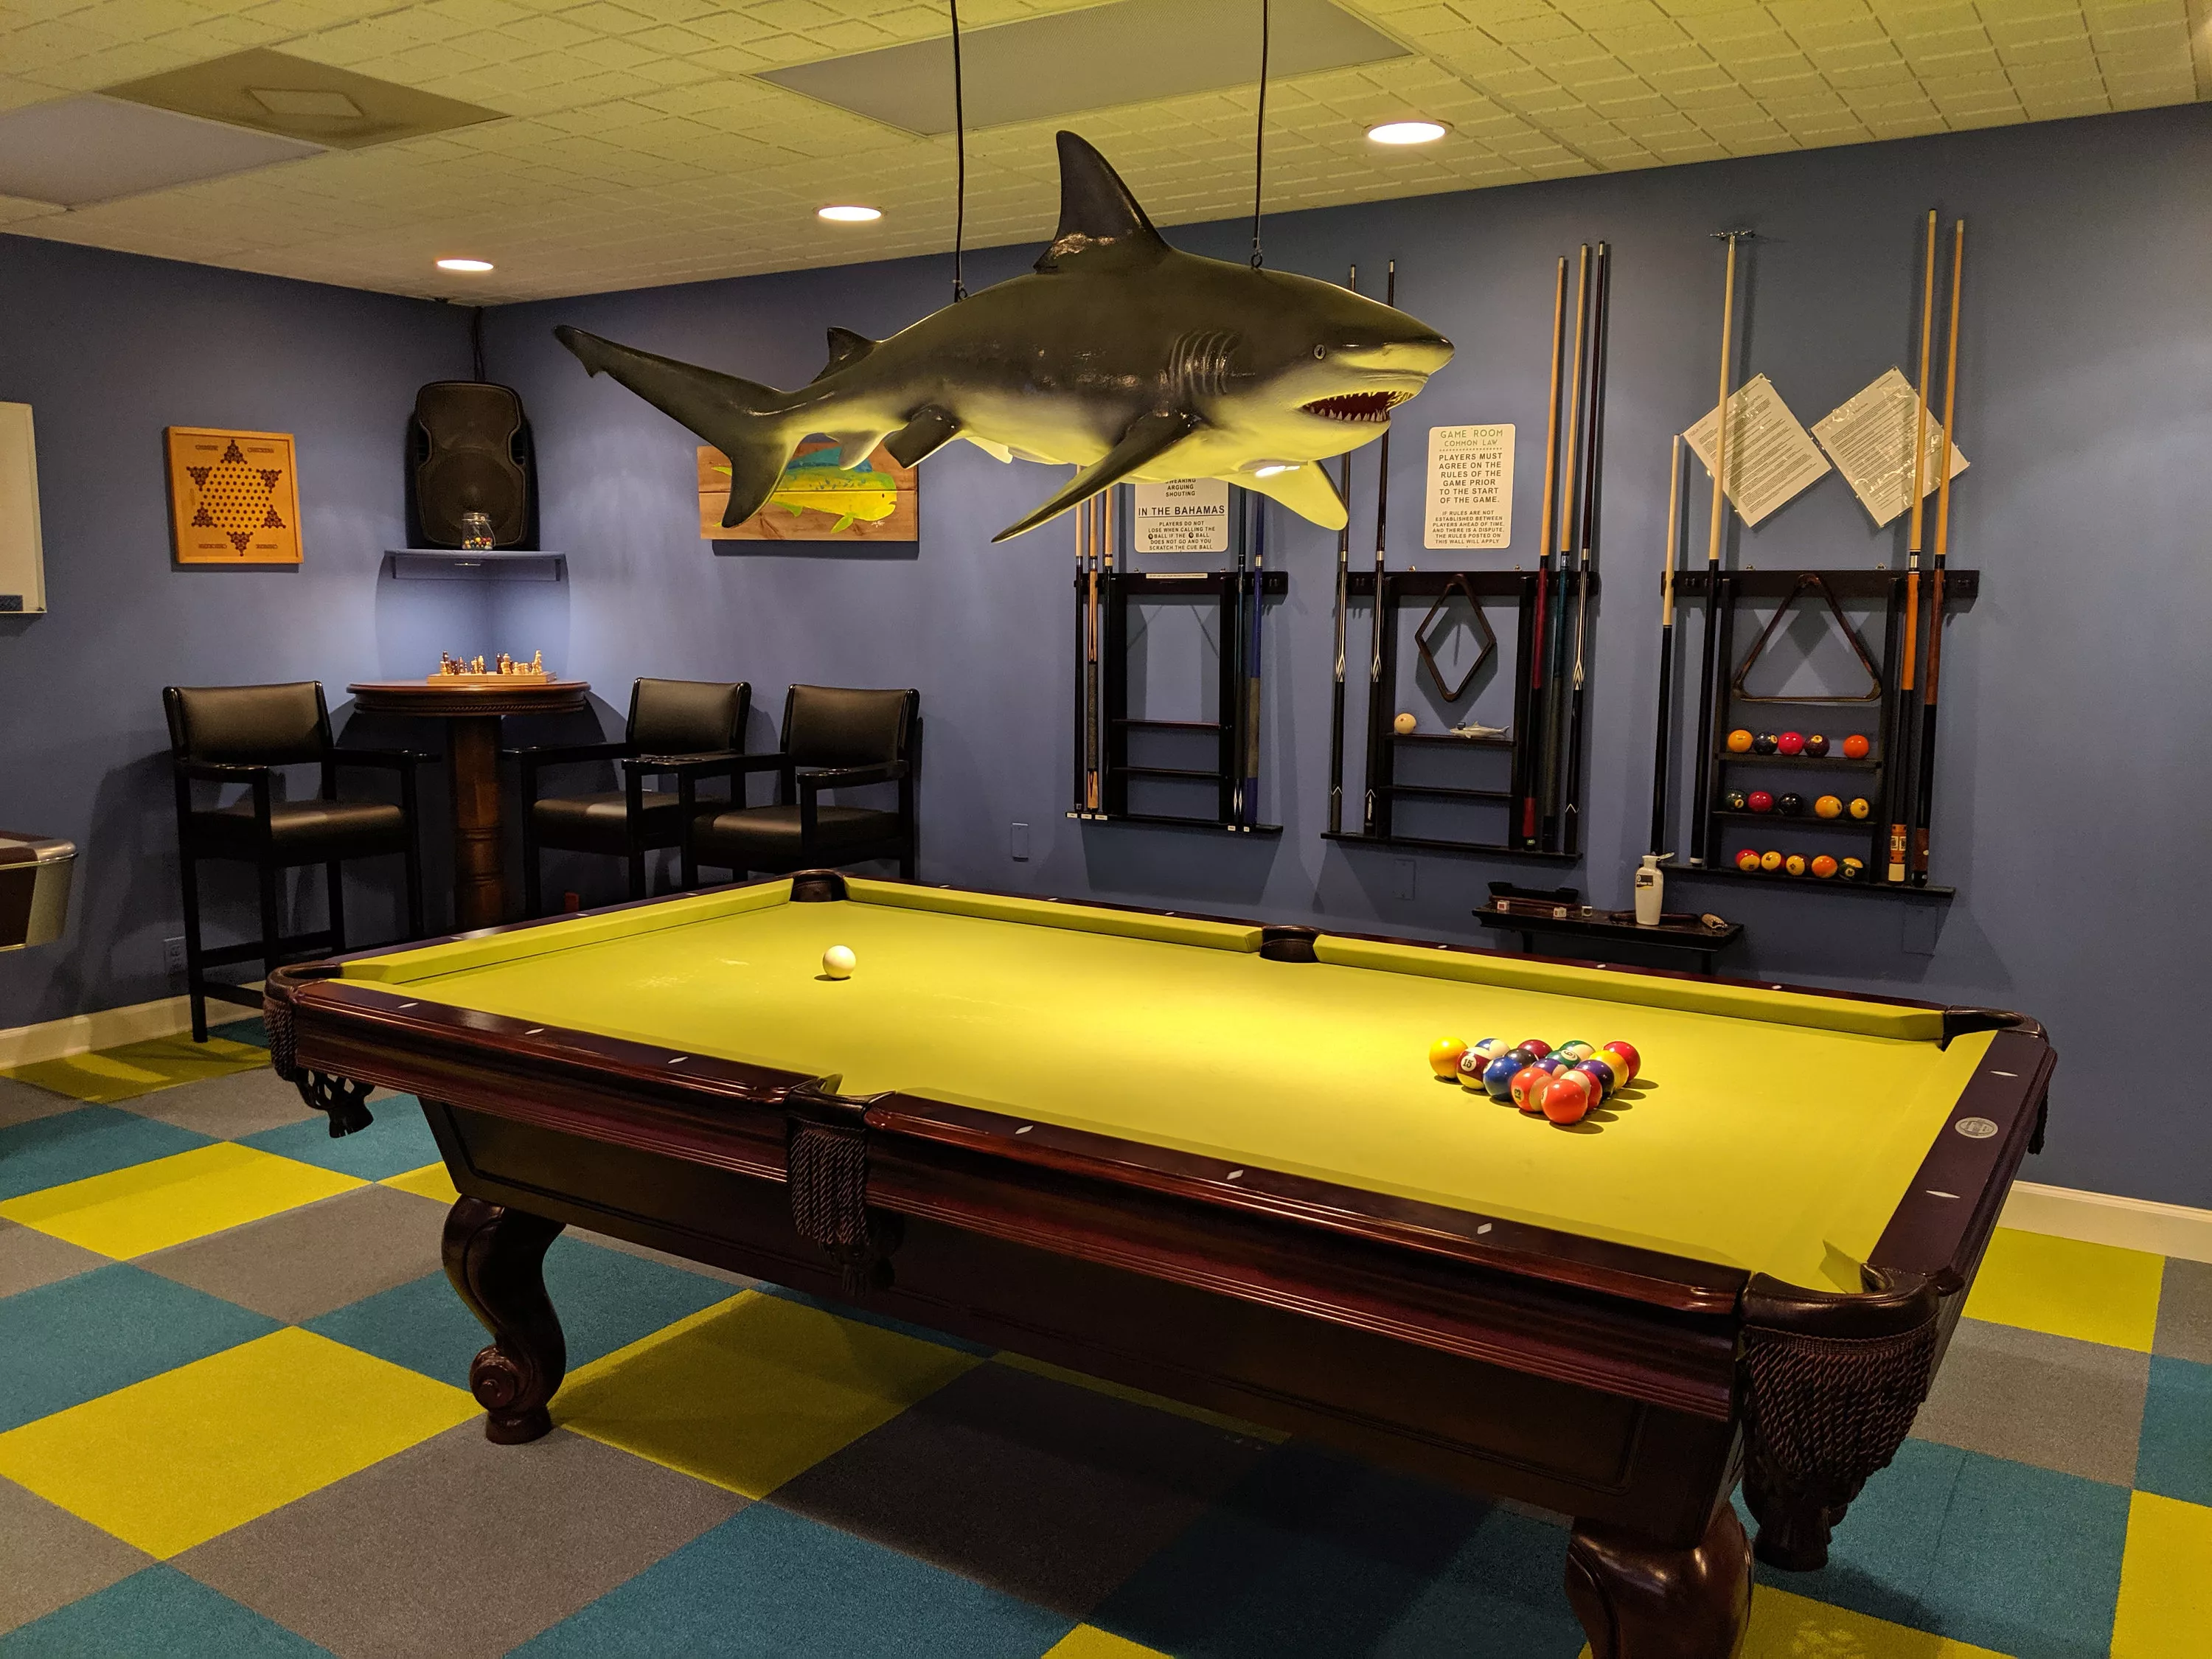 Sharks Pool House in Denmark, Europe | Billiards - Rated 3.6